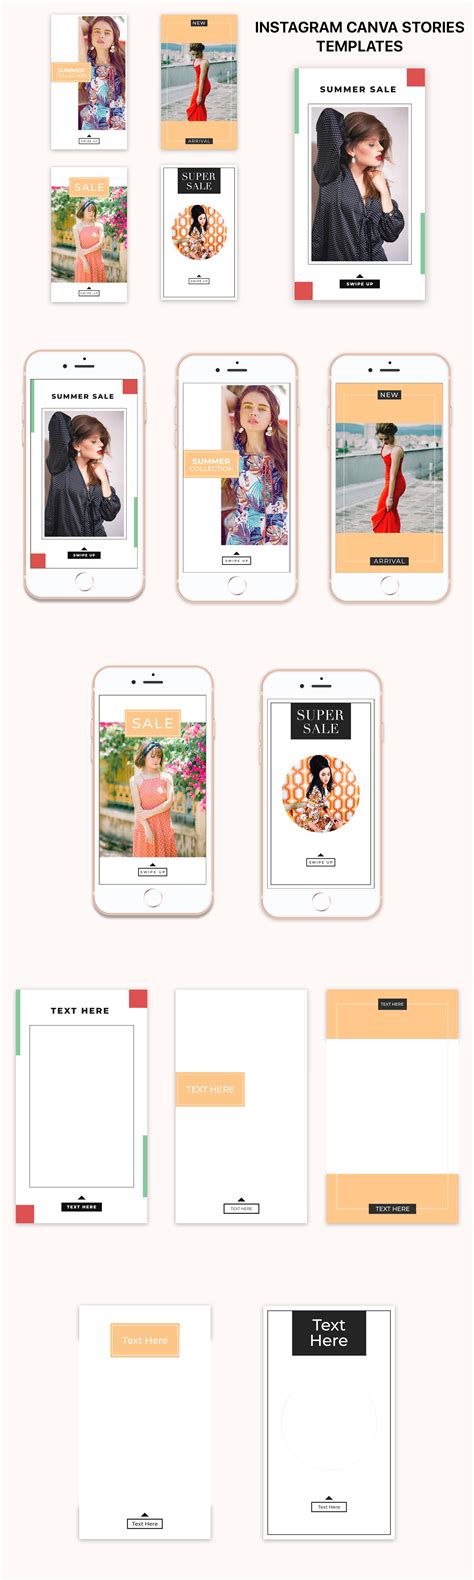 Free Instagram Canva Stories Templates On Behance